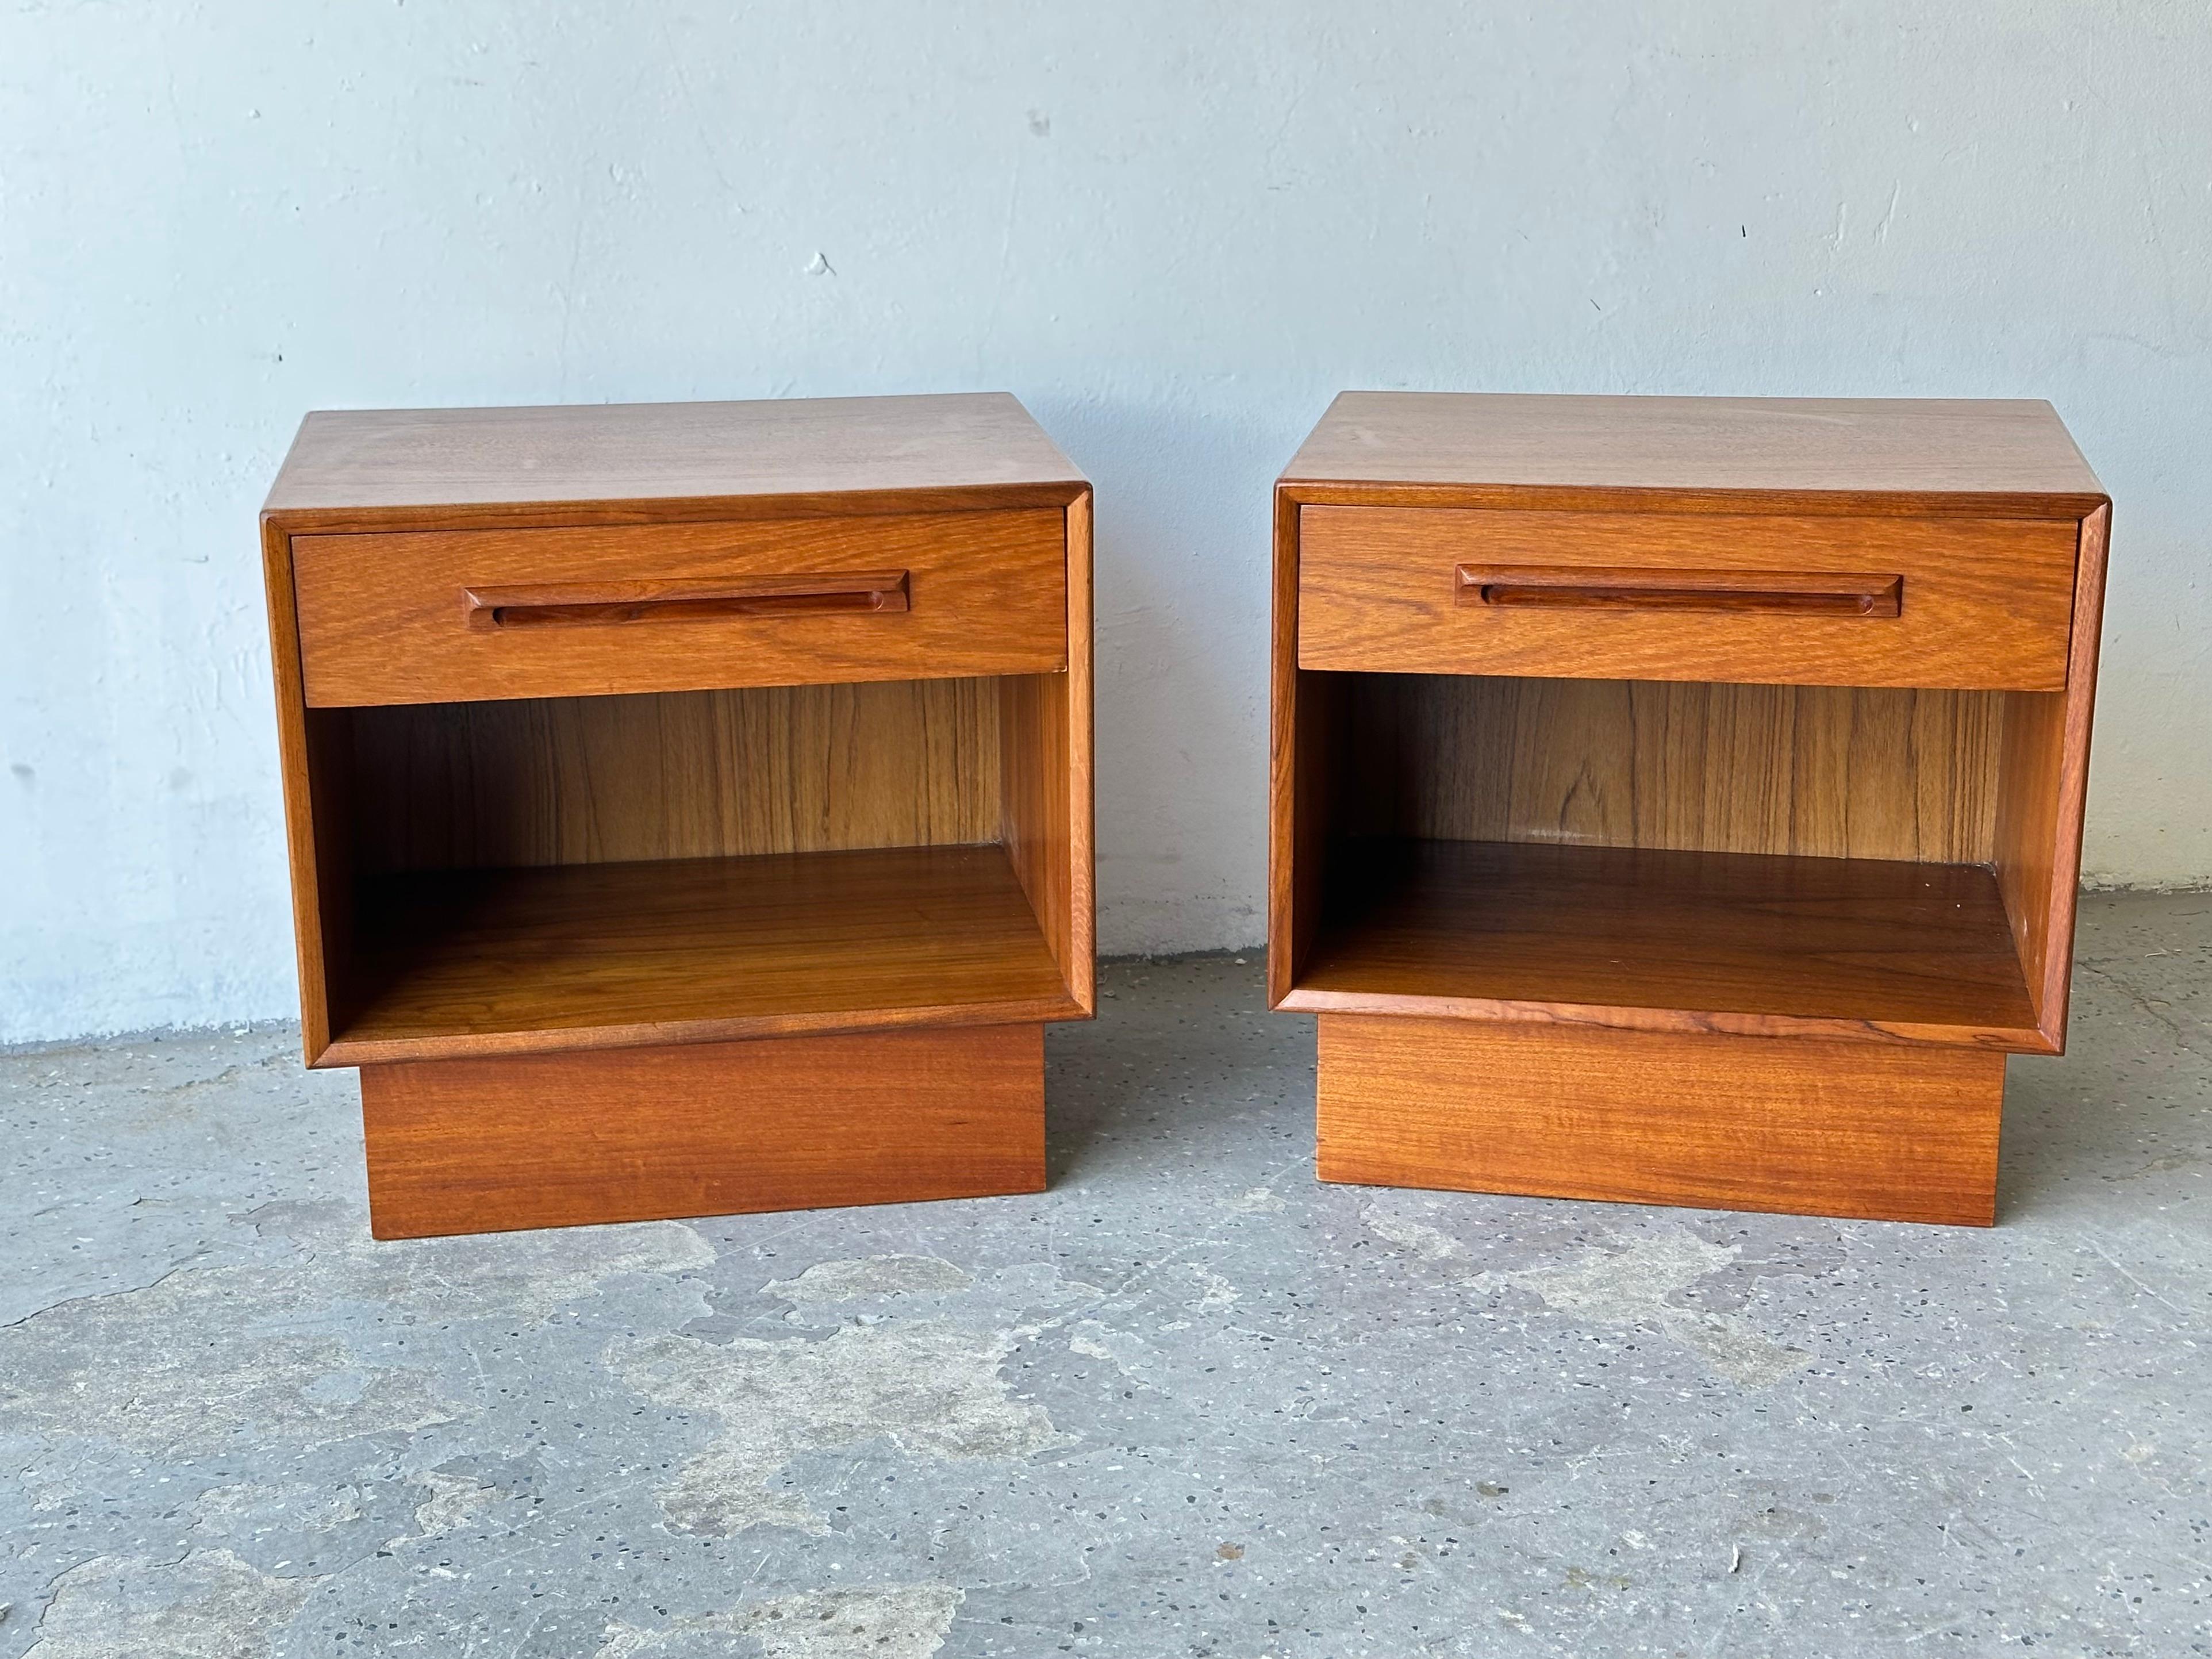 
A beautiful pair of nightstands or end tables by Westnofa of Norway. Beautiful teak veneer 

A single drawer up top, with a generous cubby space down below. Perfect for hiding all your bedside clutter. 

Drawers slide perfectly

Dimensions: